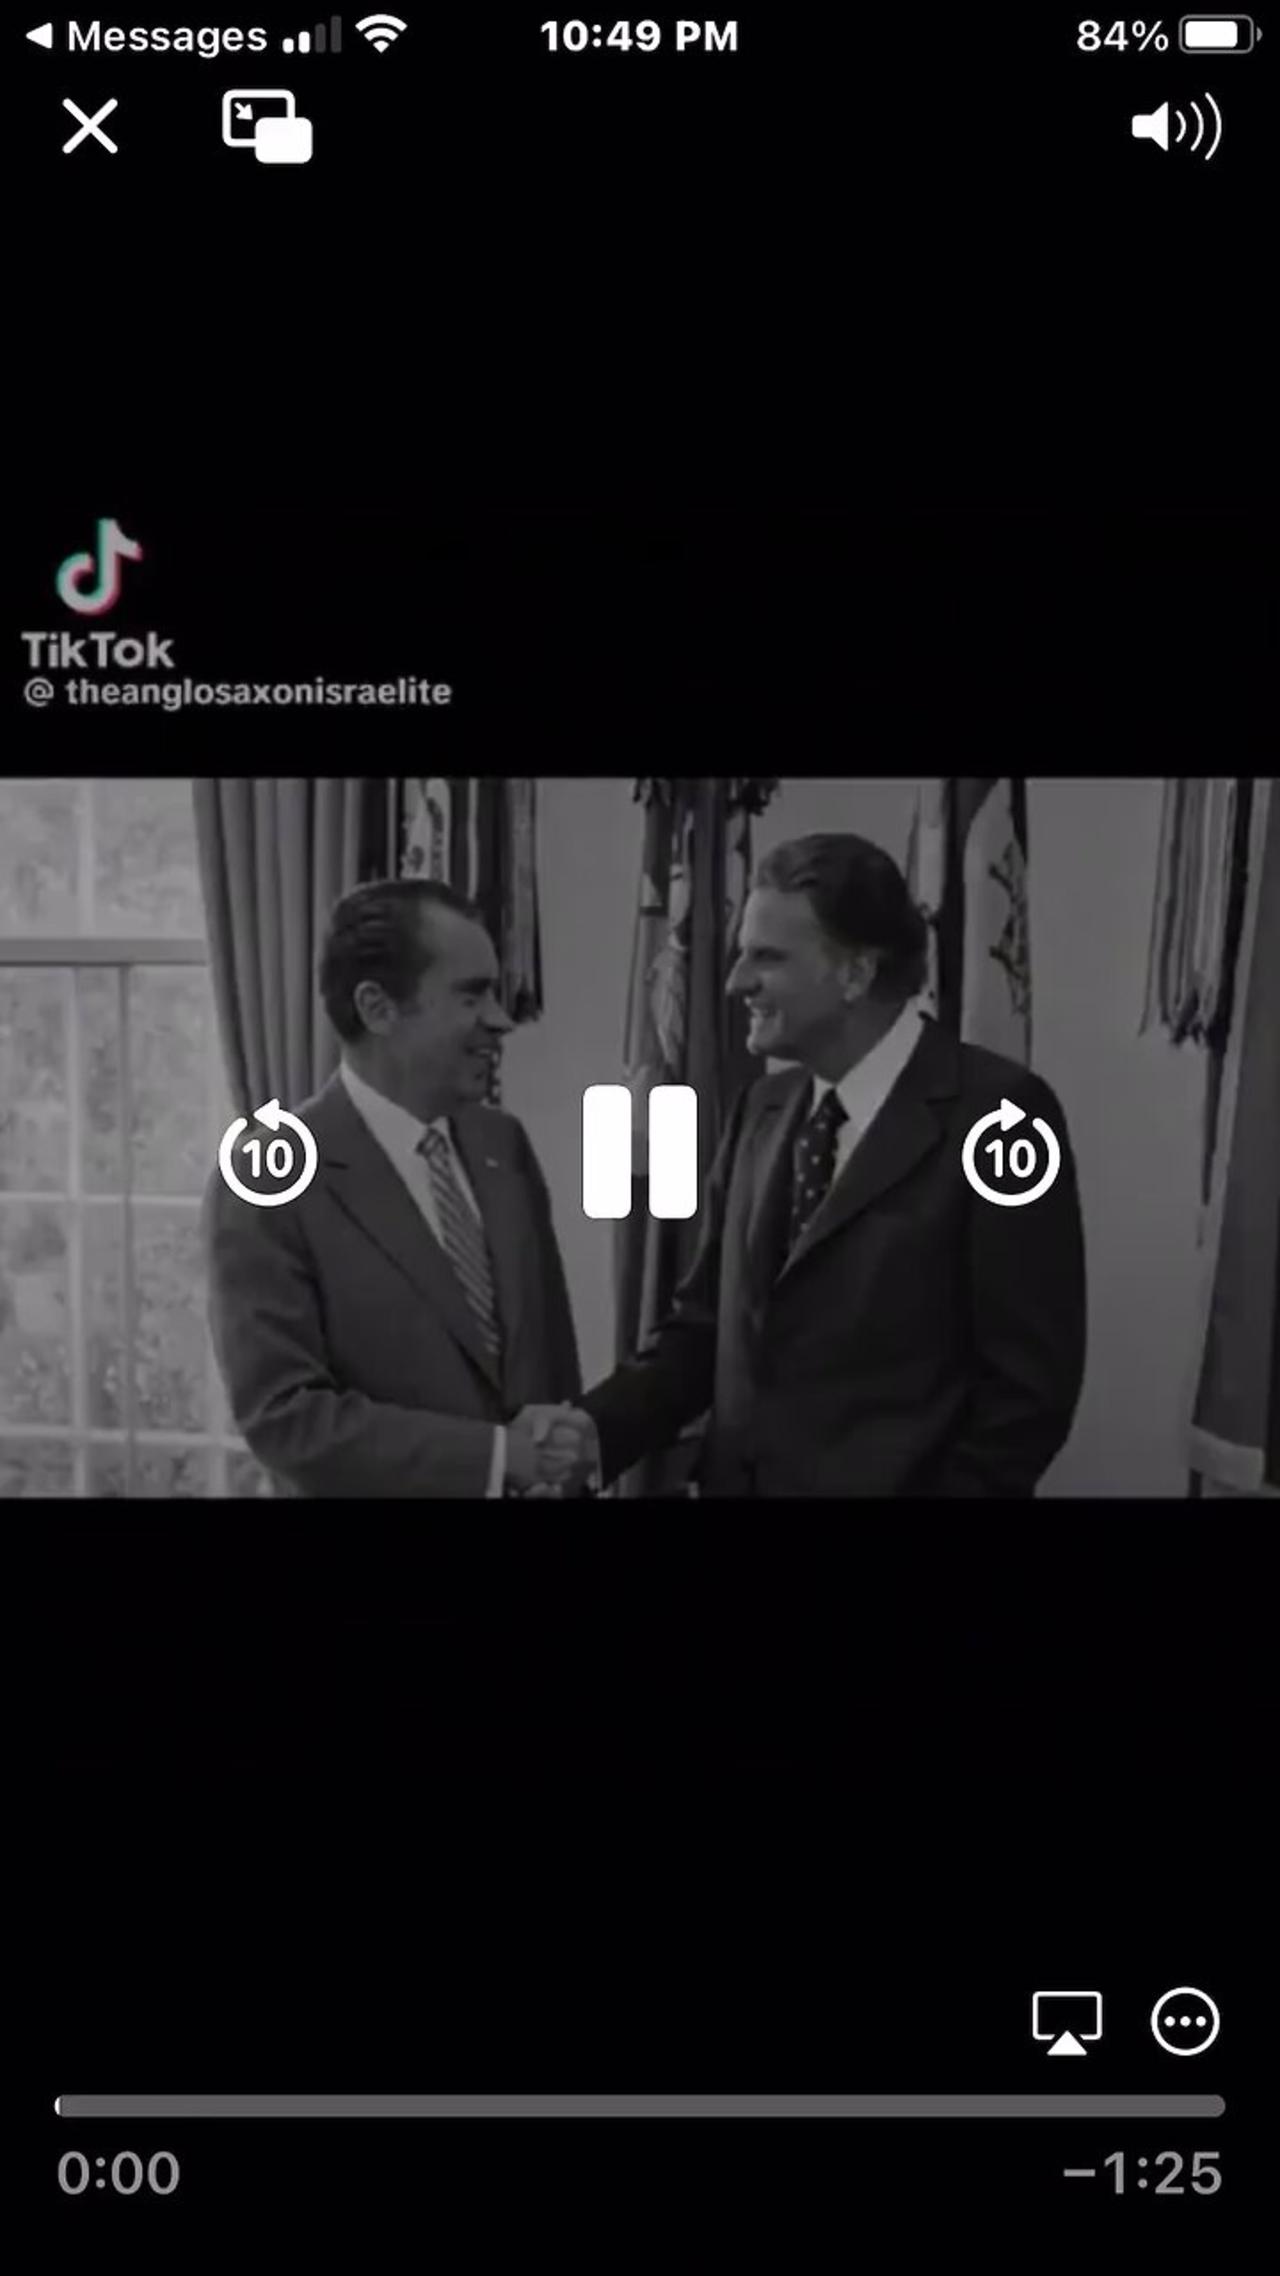 Recorded conversation between Billy Graham and President Nixon - quite revealing